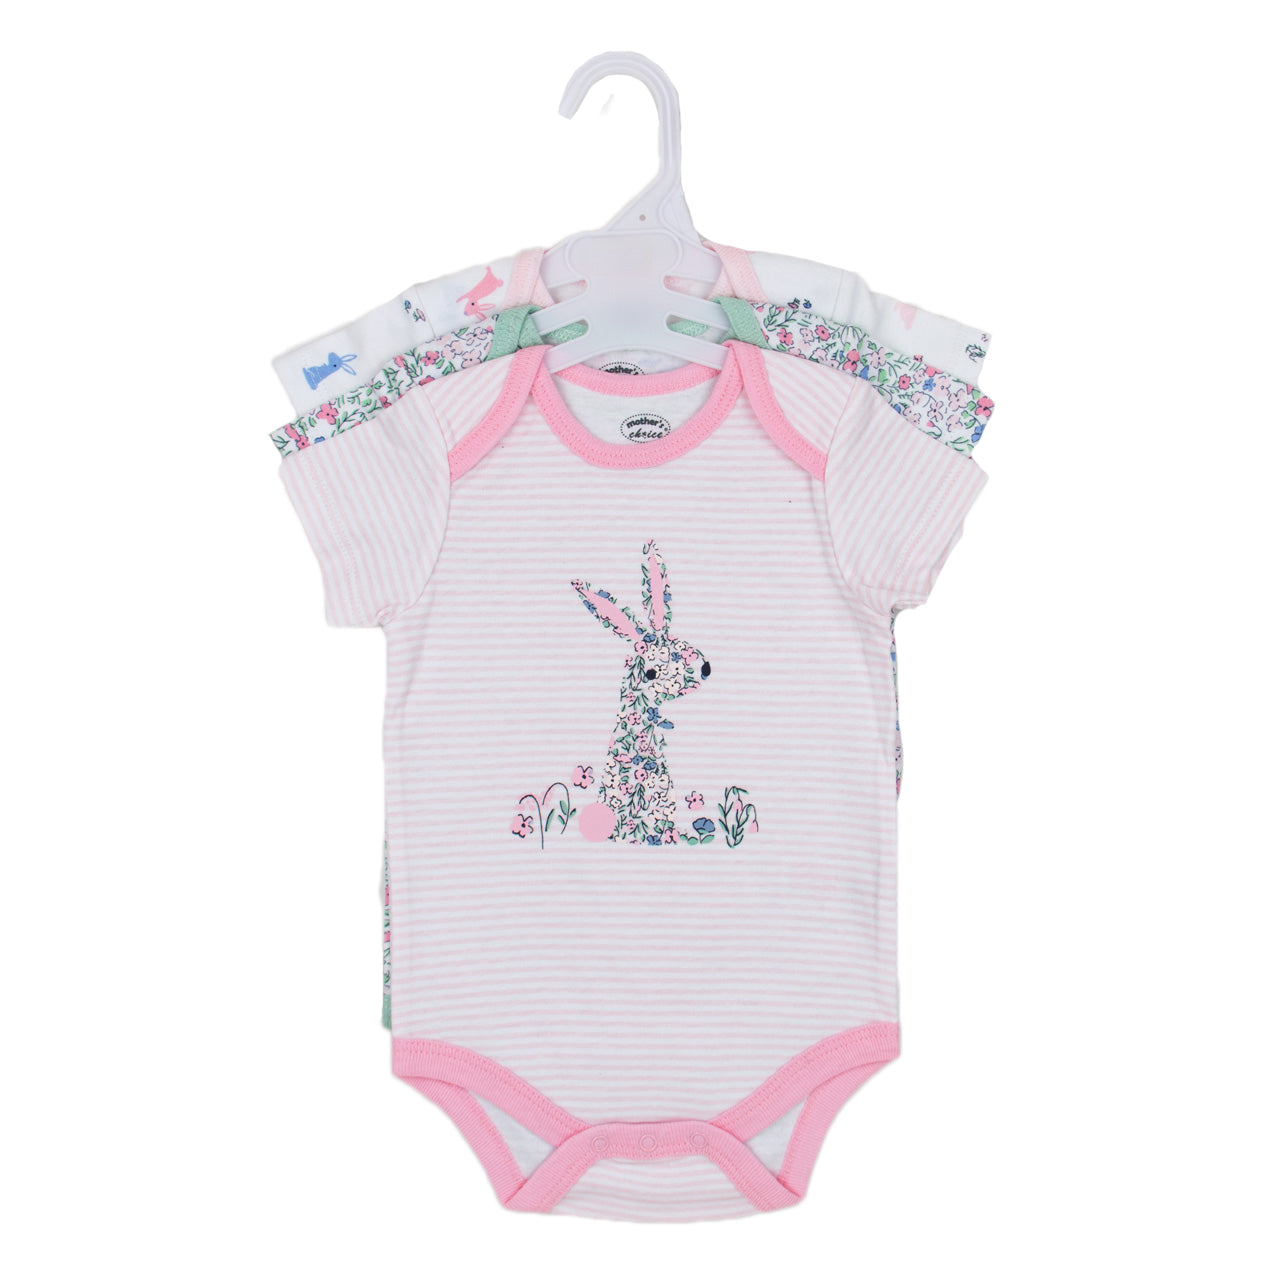 Mother's Choice 3 Pack Short Sleeves Onesie (Rabbit/IT2349)